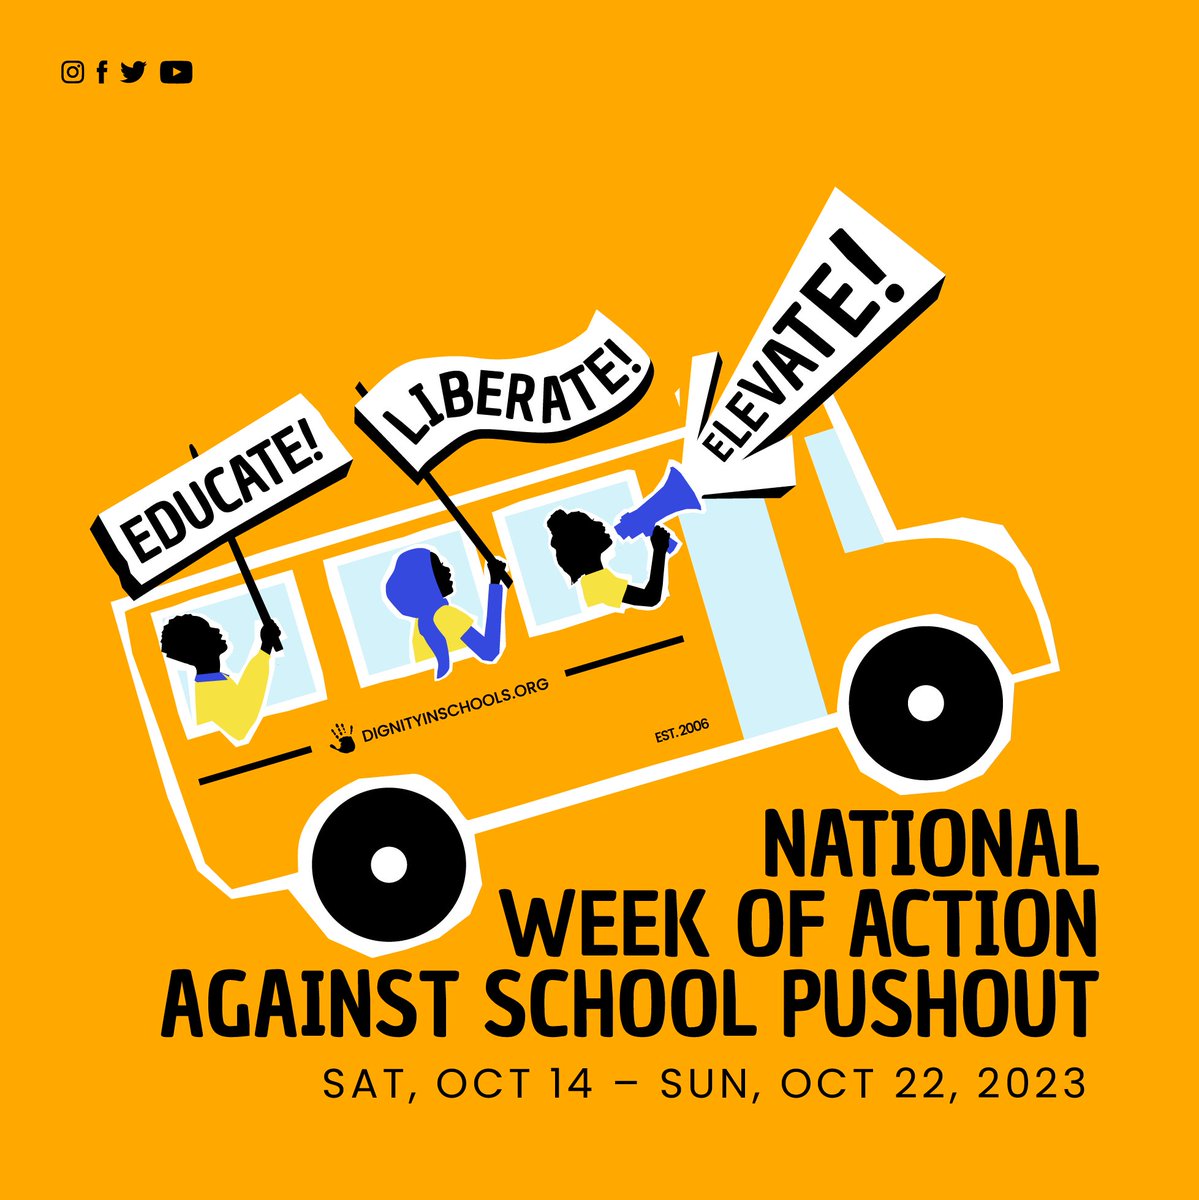 The National Week of Action Against School Pushout is so important because it brings together a community of impacted folks raising their voices to end harmful discipline practices all across the South. #DSCWoA2023